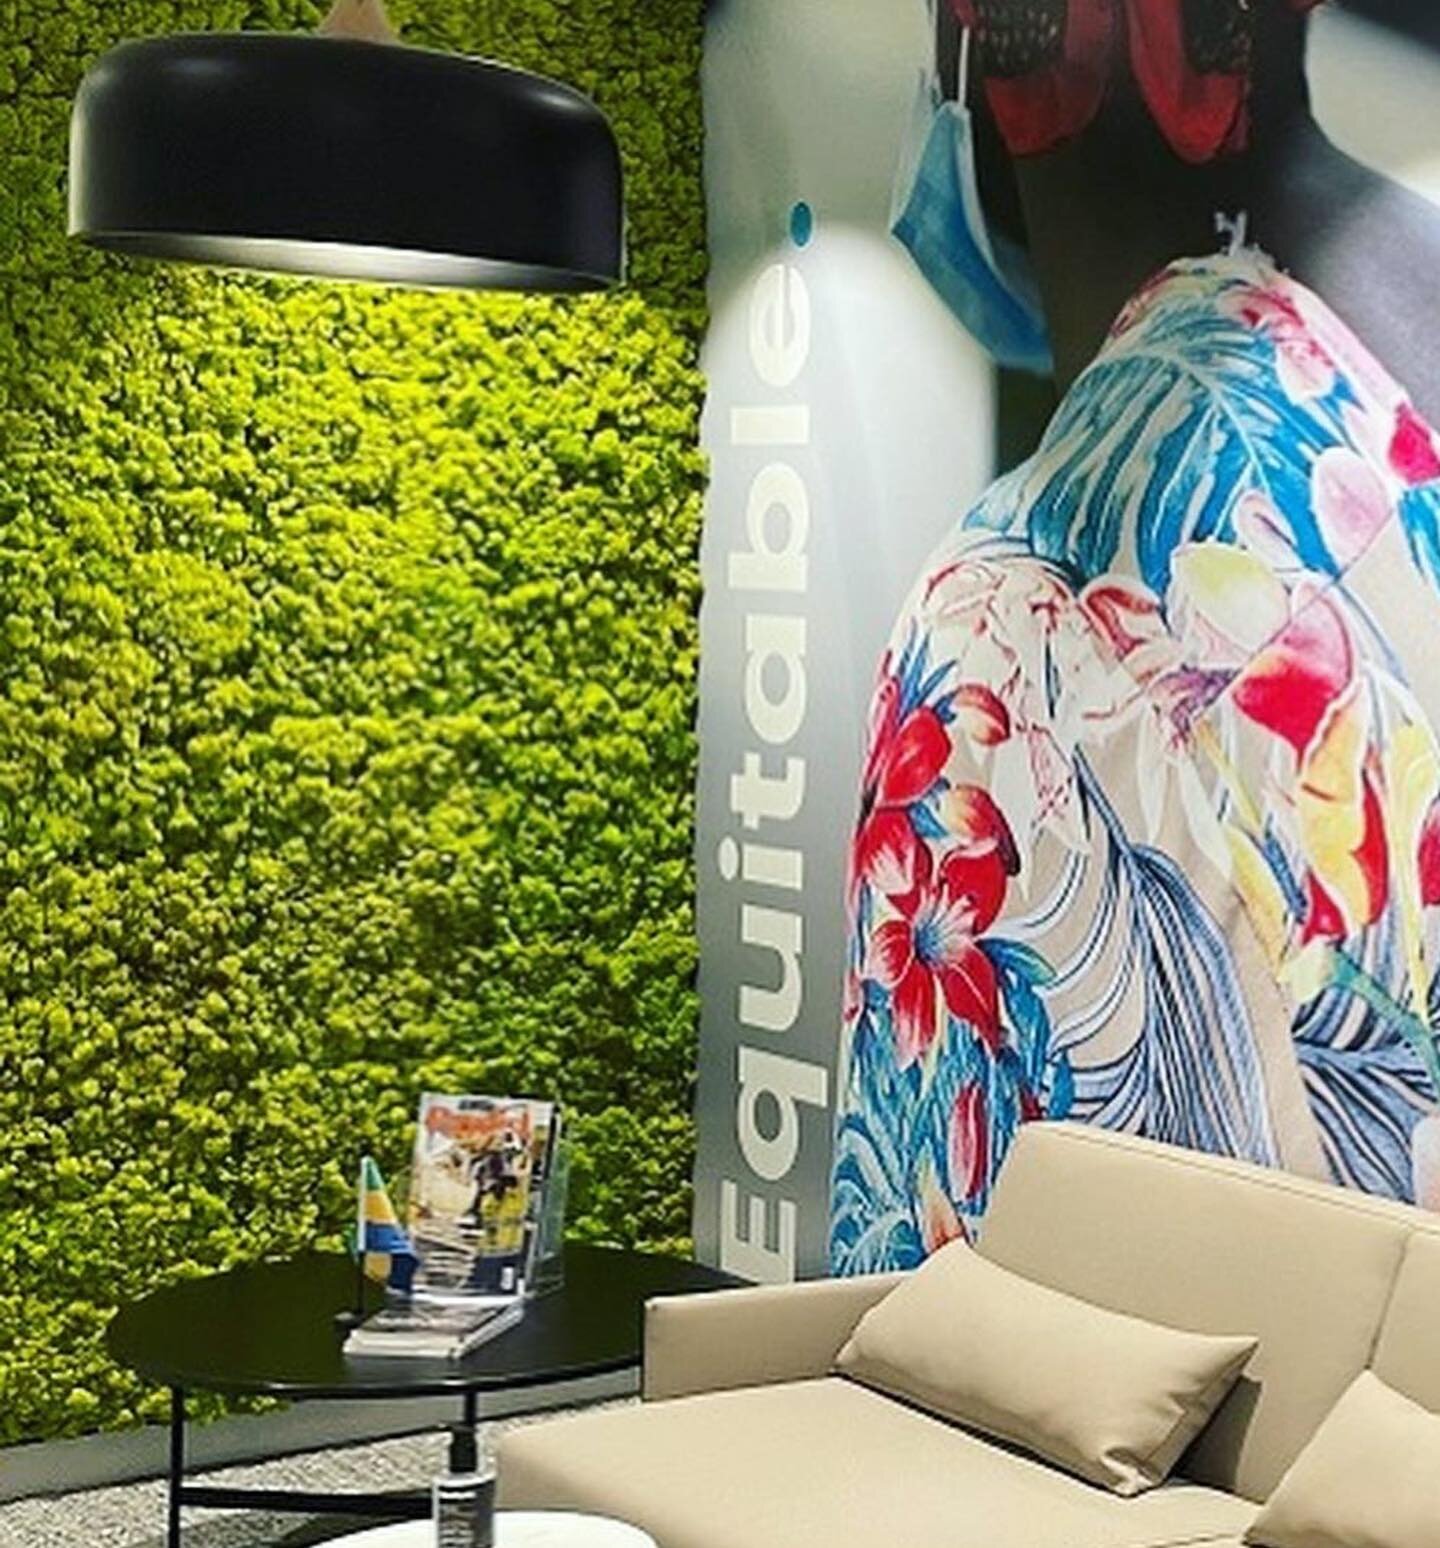 How cool is this reception area for a mining company in the Perth CBD? 💚

✳️✳️✳️By MOSSWALL  in WASABI 
@verdeprofilo 

.
.
#greenwall #perthcbd #biophilicdesign #interiorsperth #perthinteriordesign #australianinteriors #australianinteriordesign #re